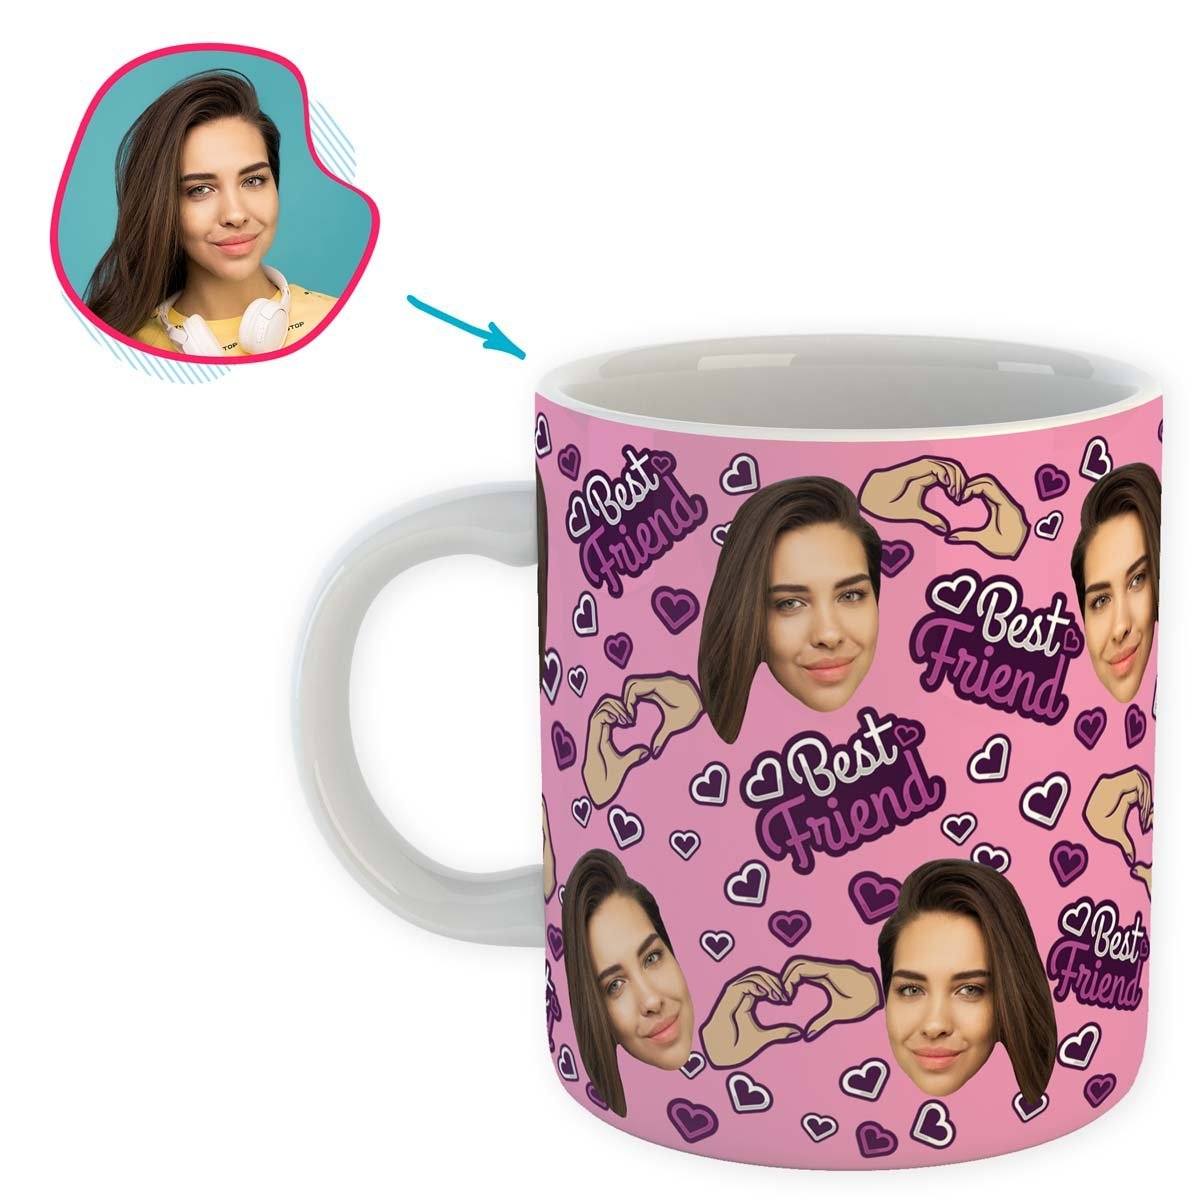 BFF for Her Personalized Mug